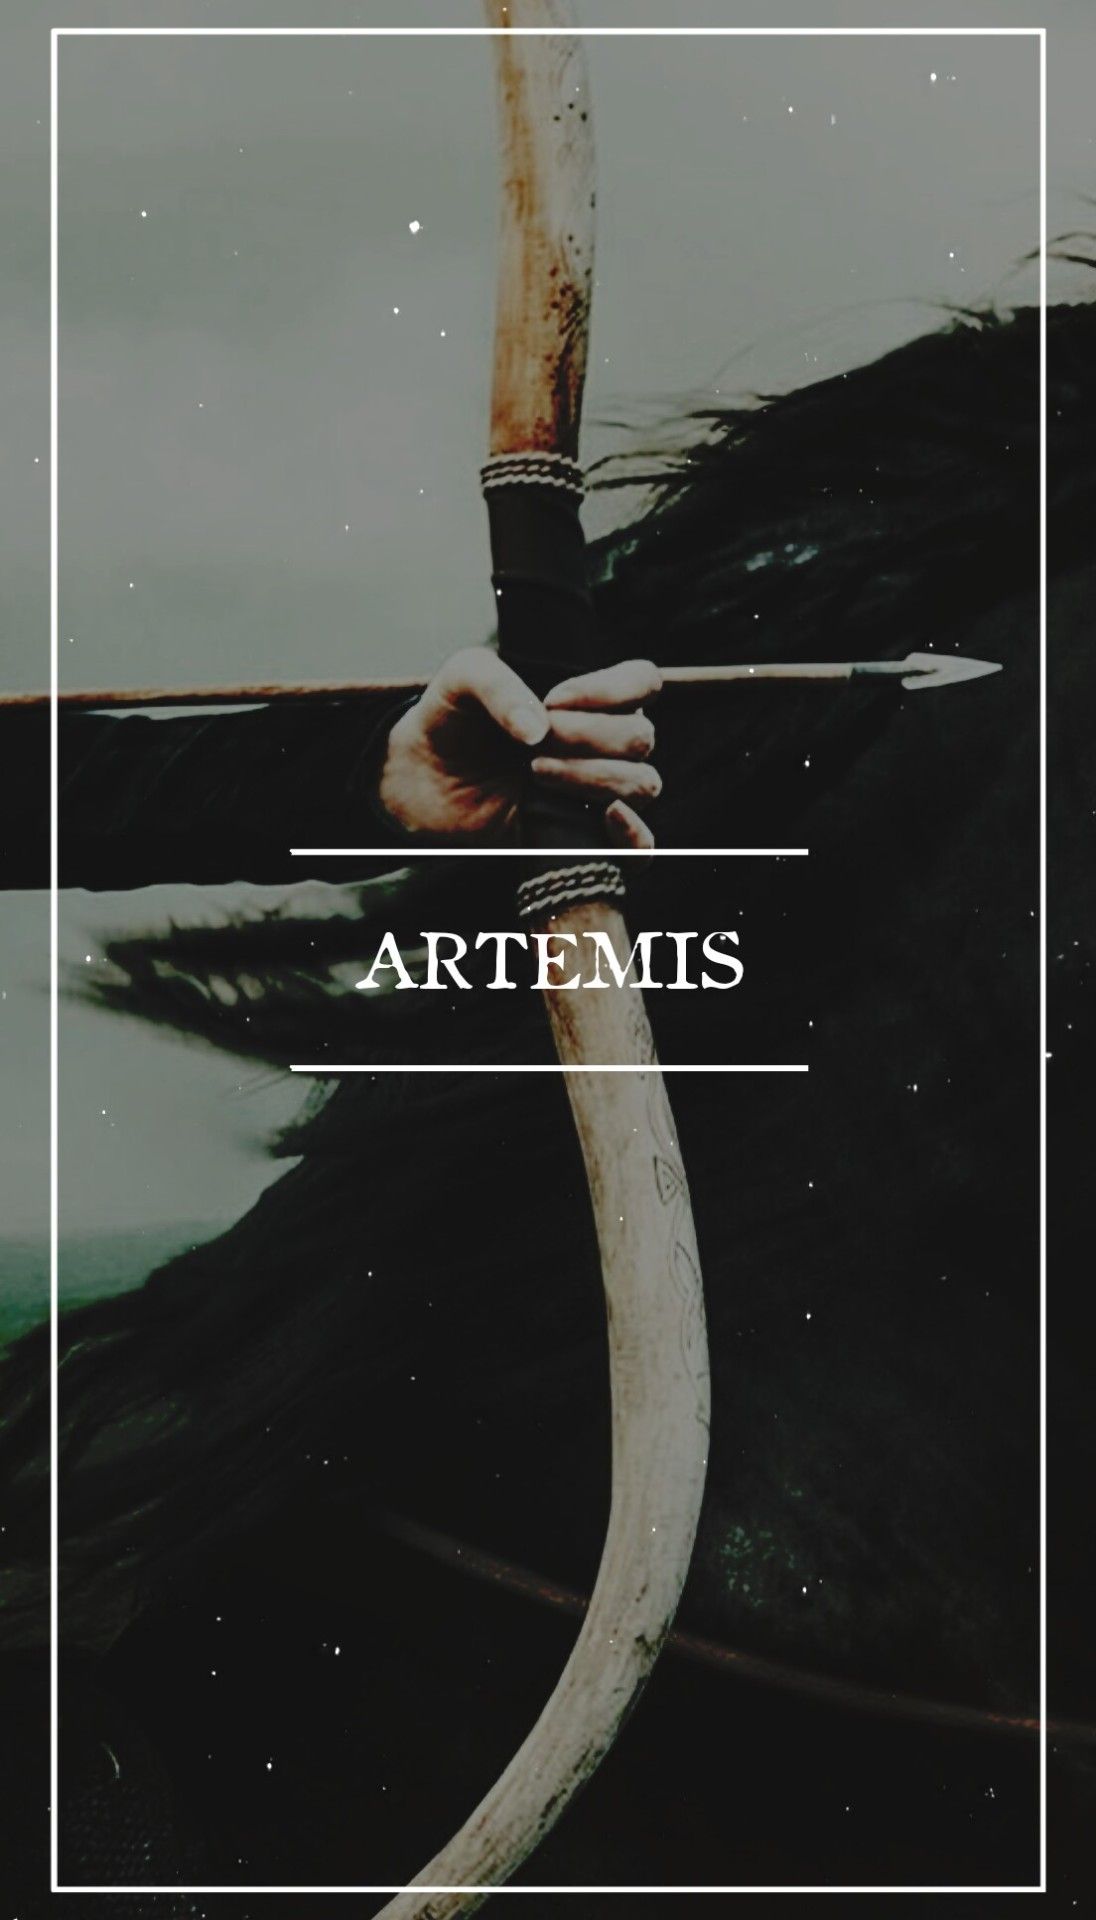 Artemis, the Greek goddess of the hunt, is often depicted holding a bow and quiver of arrows. - Artemis